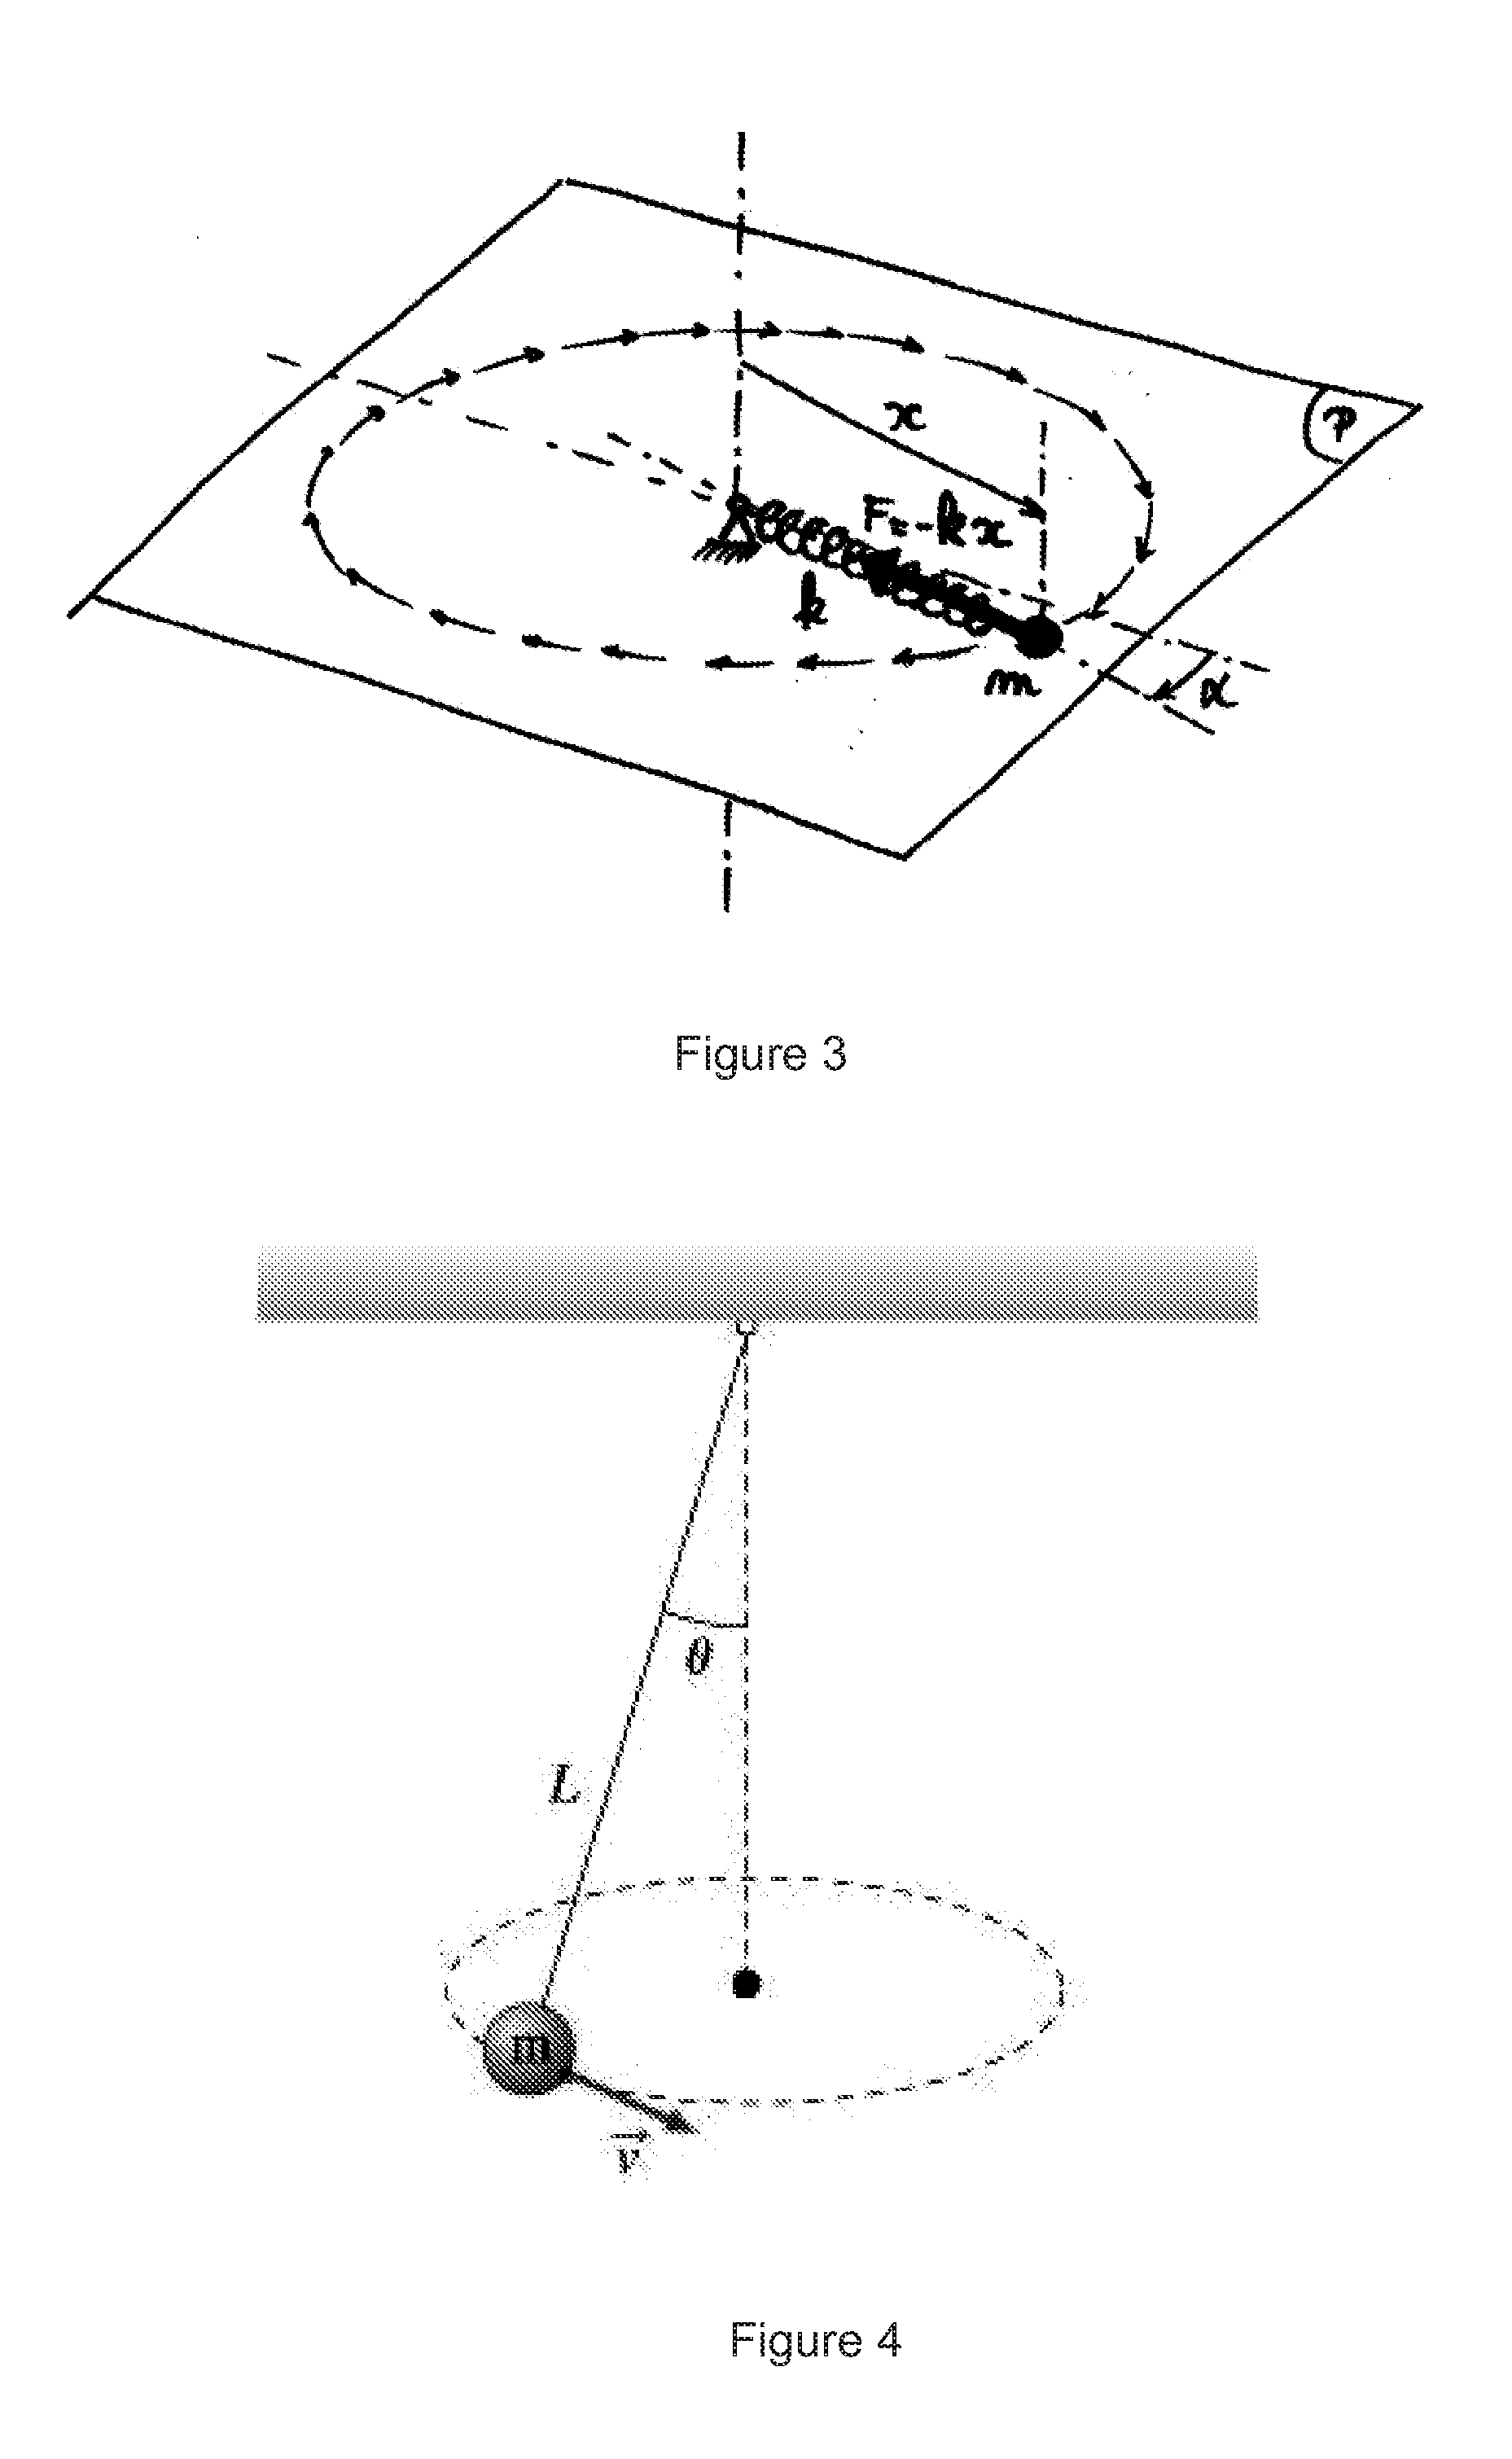 Isotropic Harmonic Oscillator and Associated Time Base Without Escapement or With Simplified Escapement